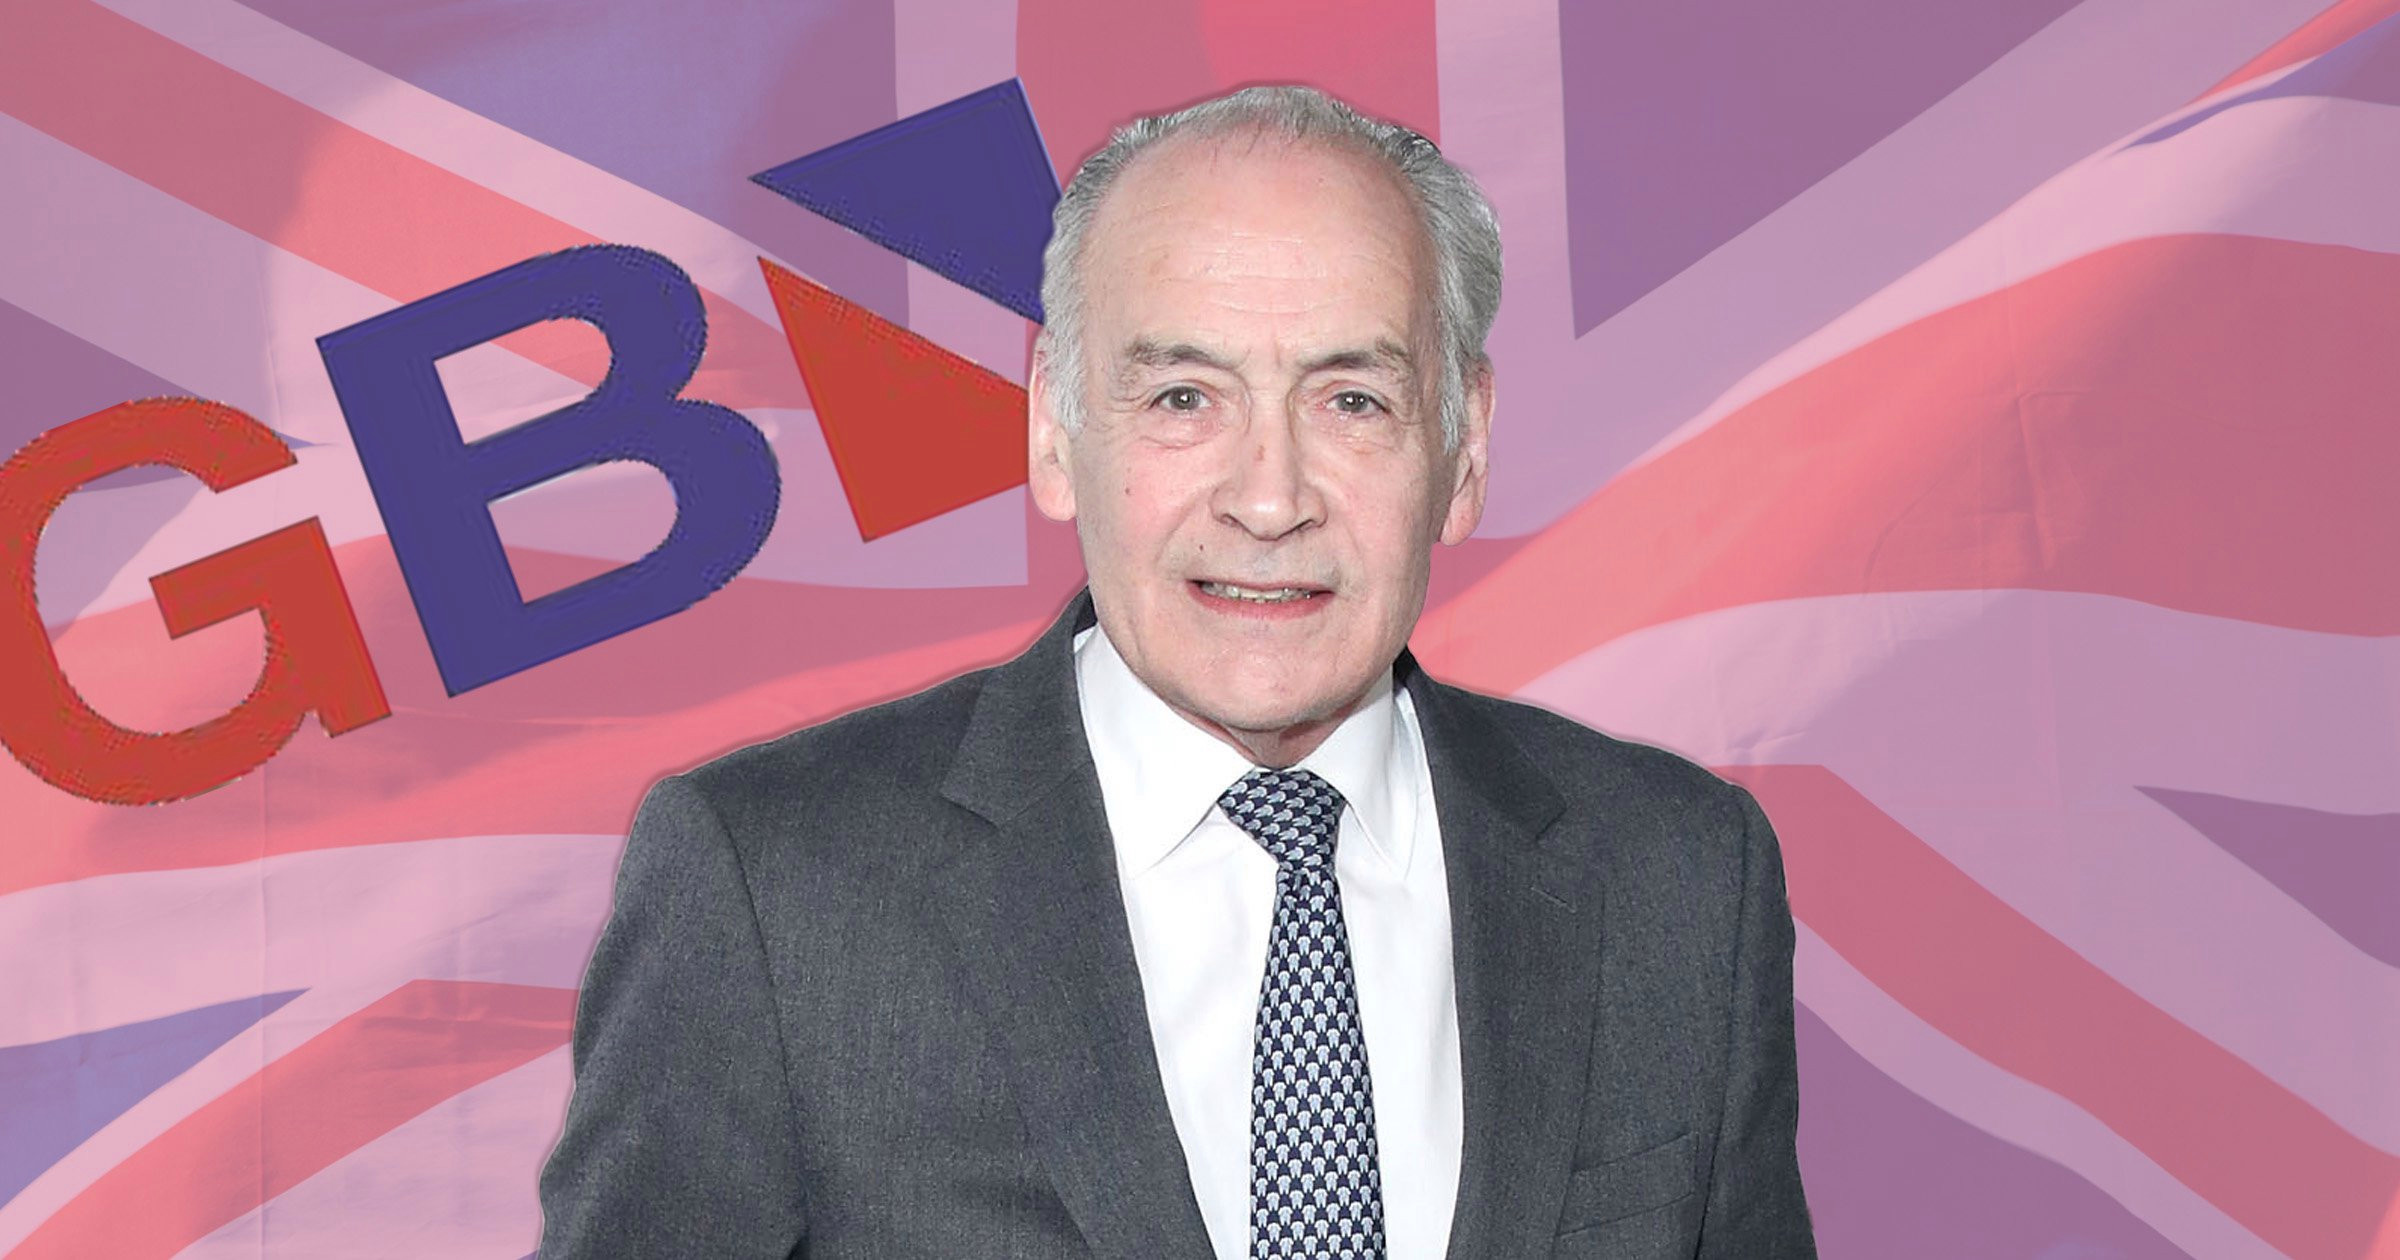 Alastair Stewart announces return to GB News after breaking hip: ‘The world has gone bonkers’